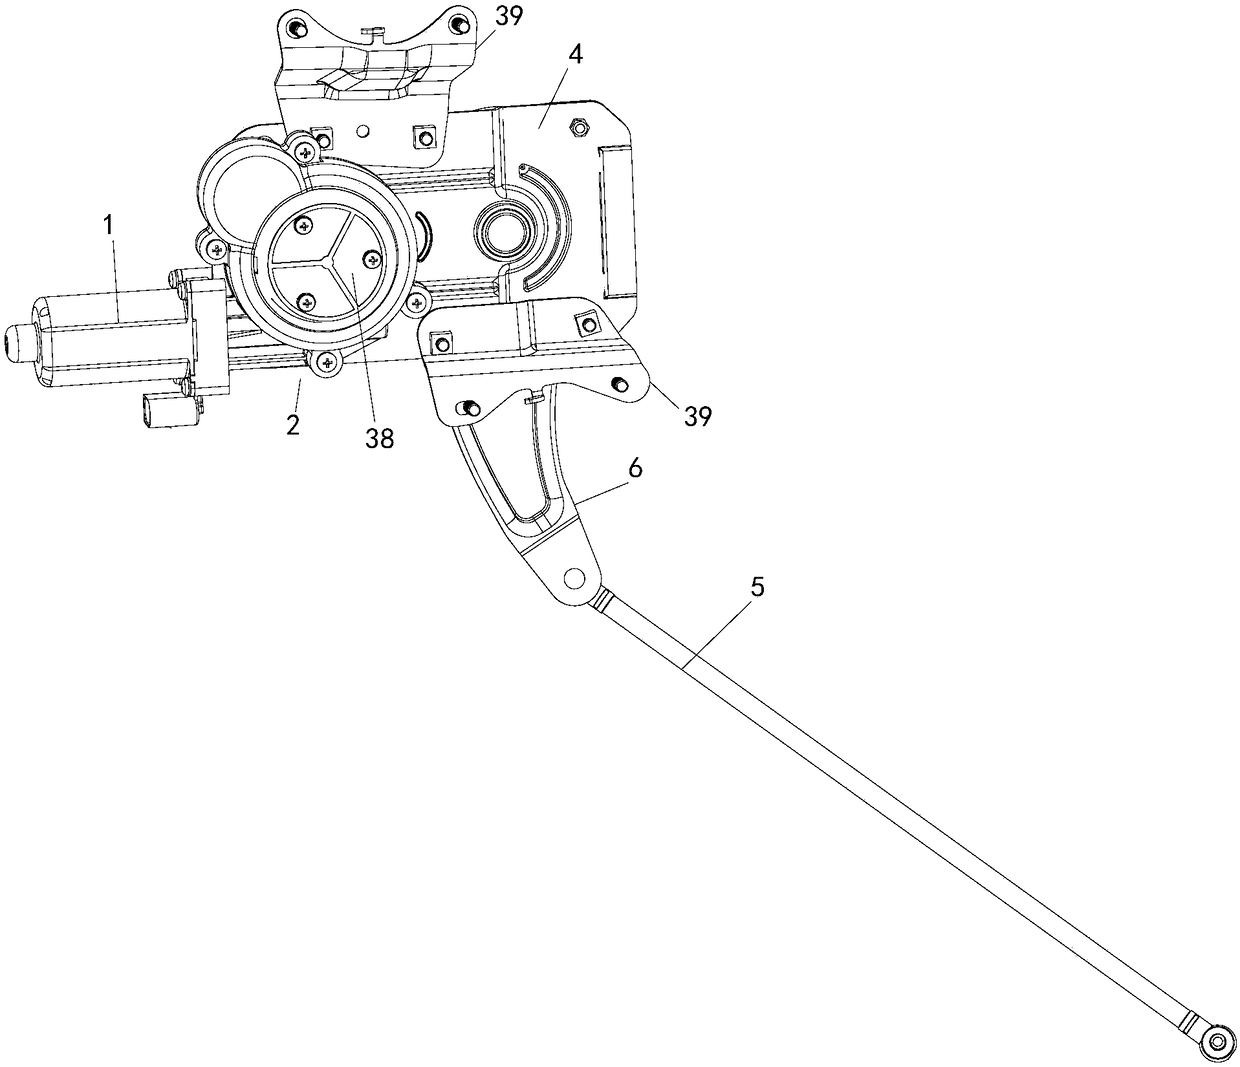 Electric opening-closing drive mechanism for automobile tail gate